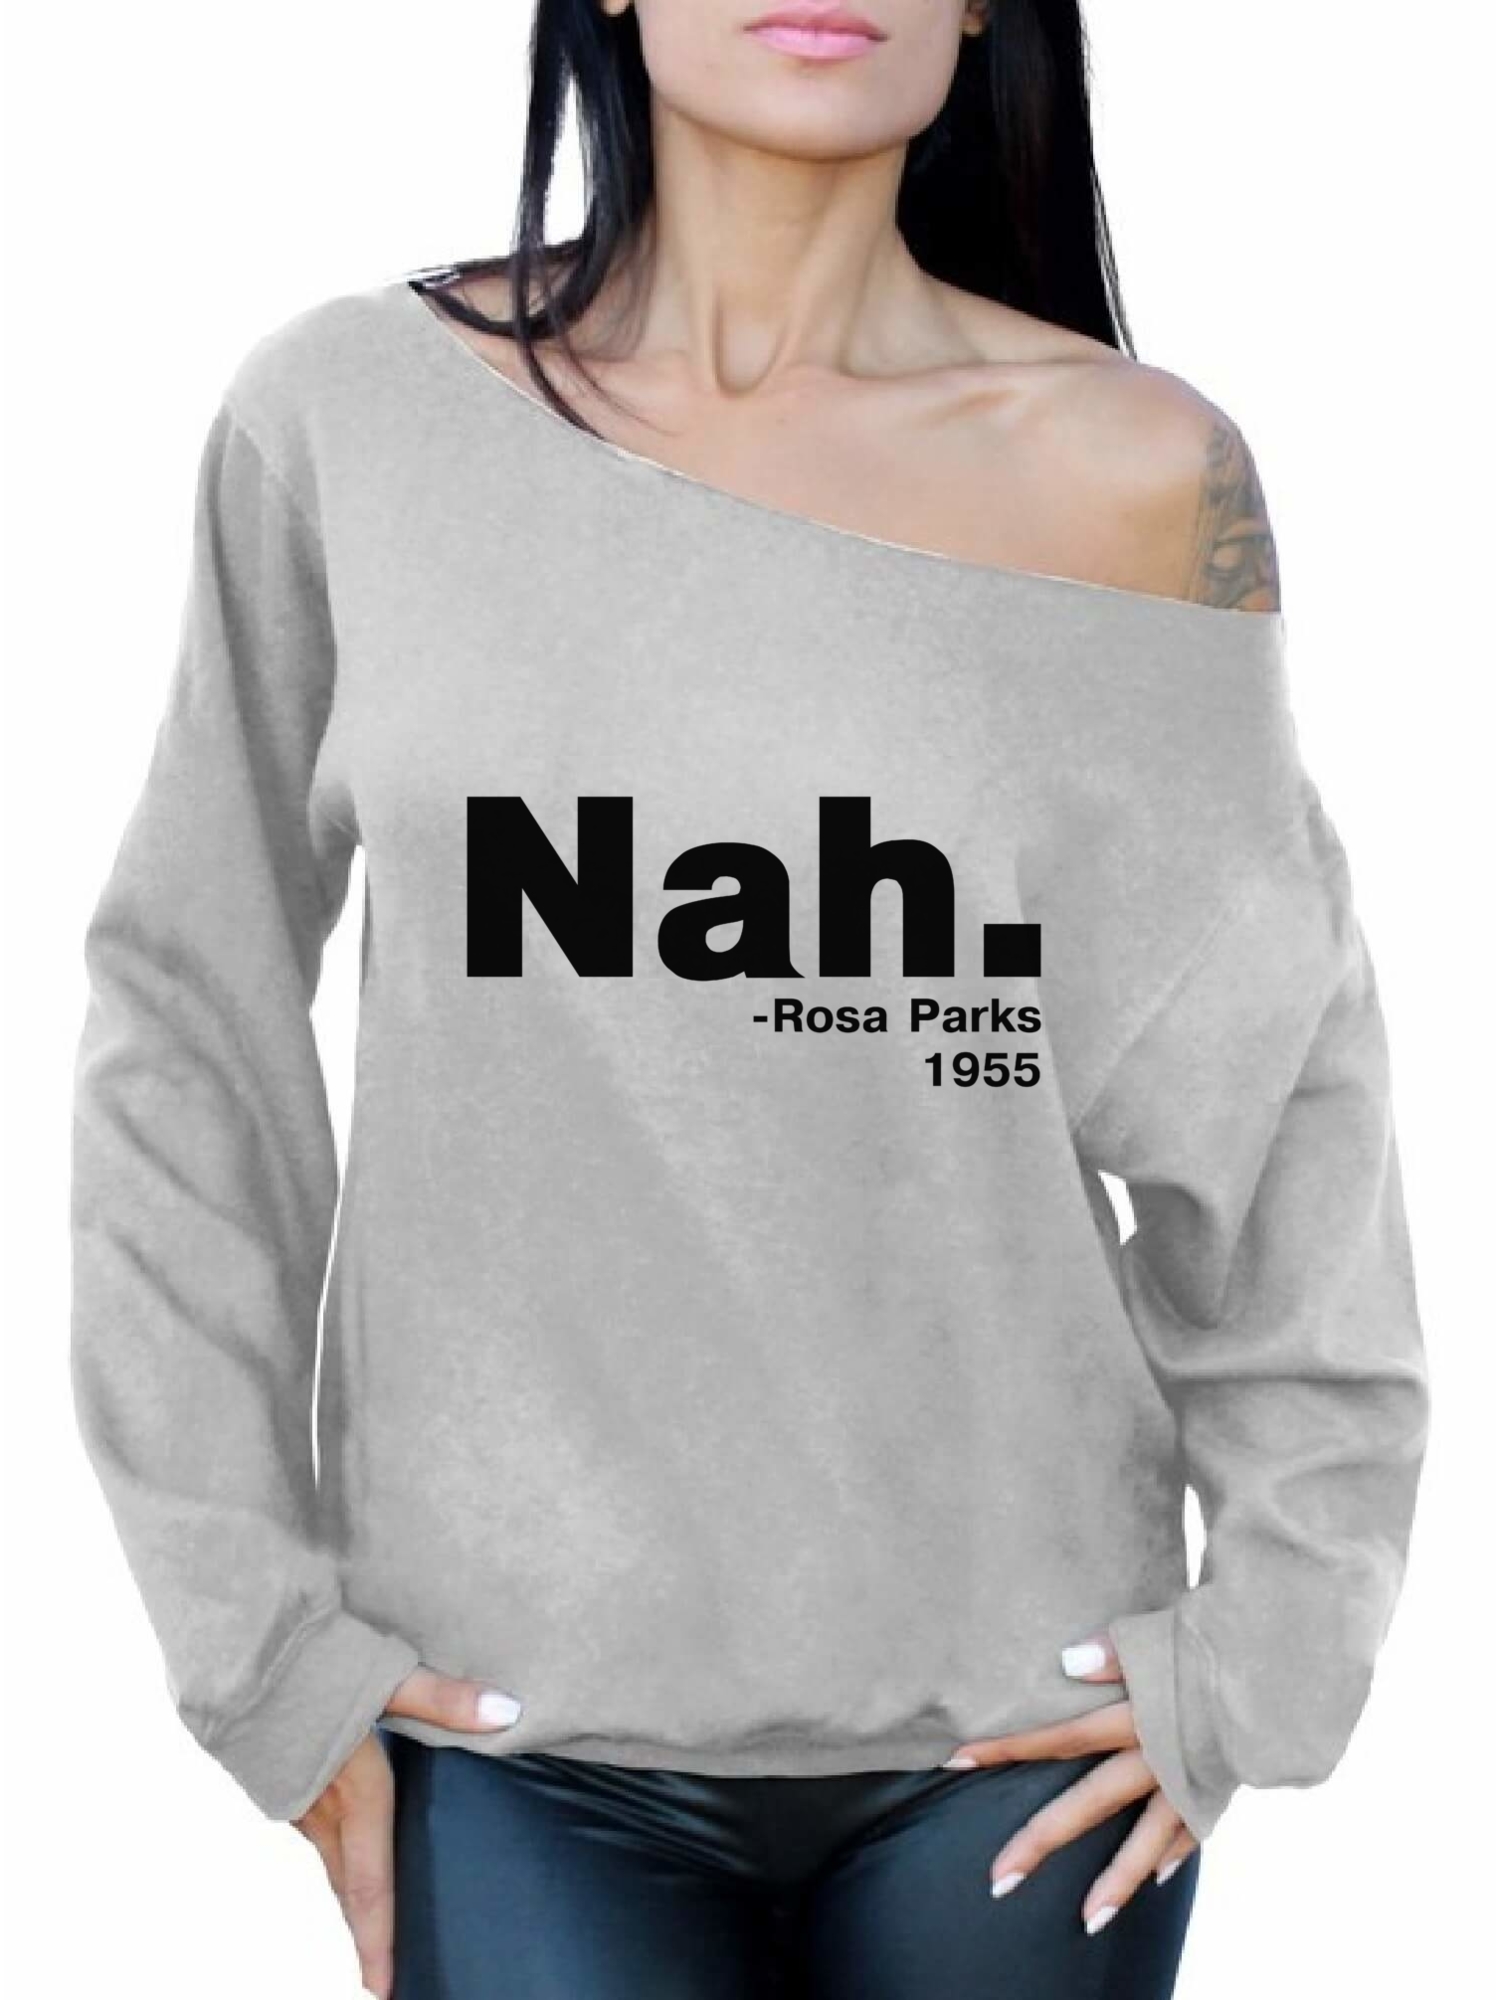 Awkward Styles - Awkward Styles Women's Rosa Parks Nah Graphic Off